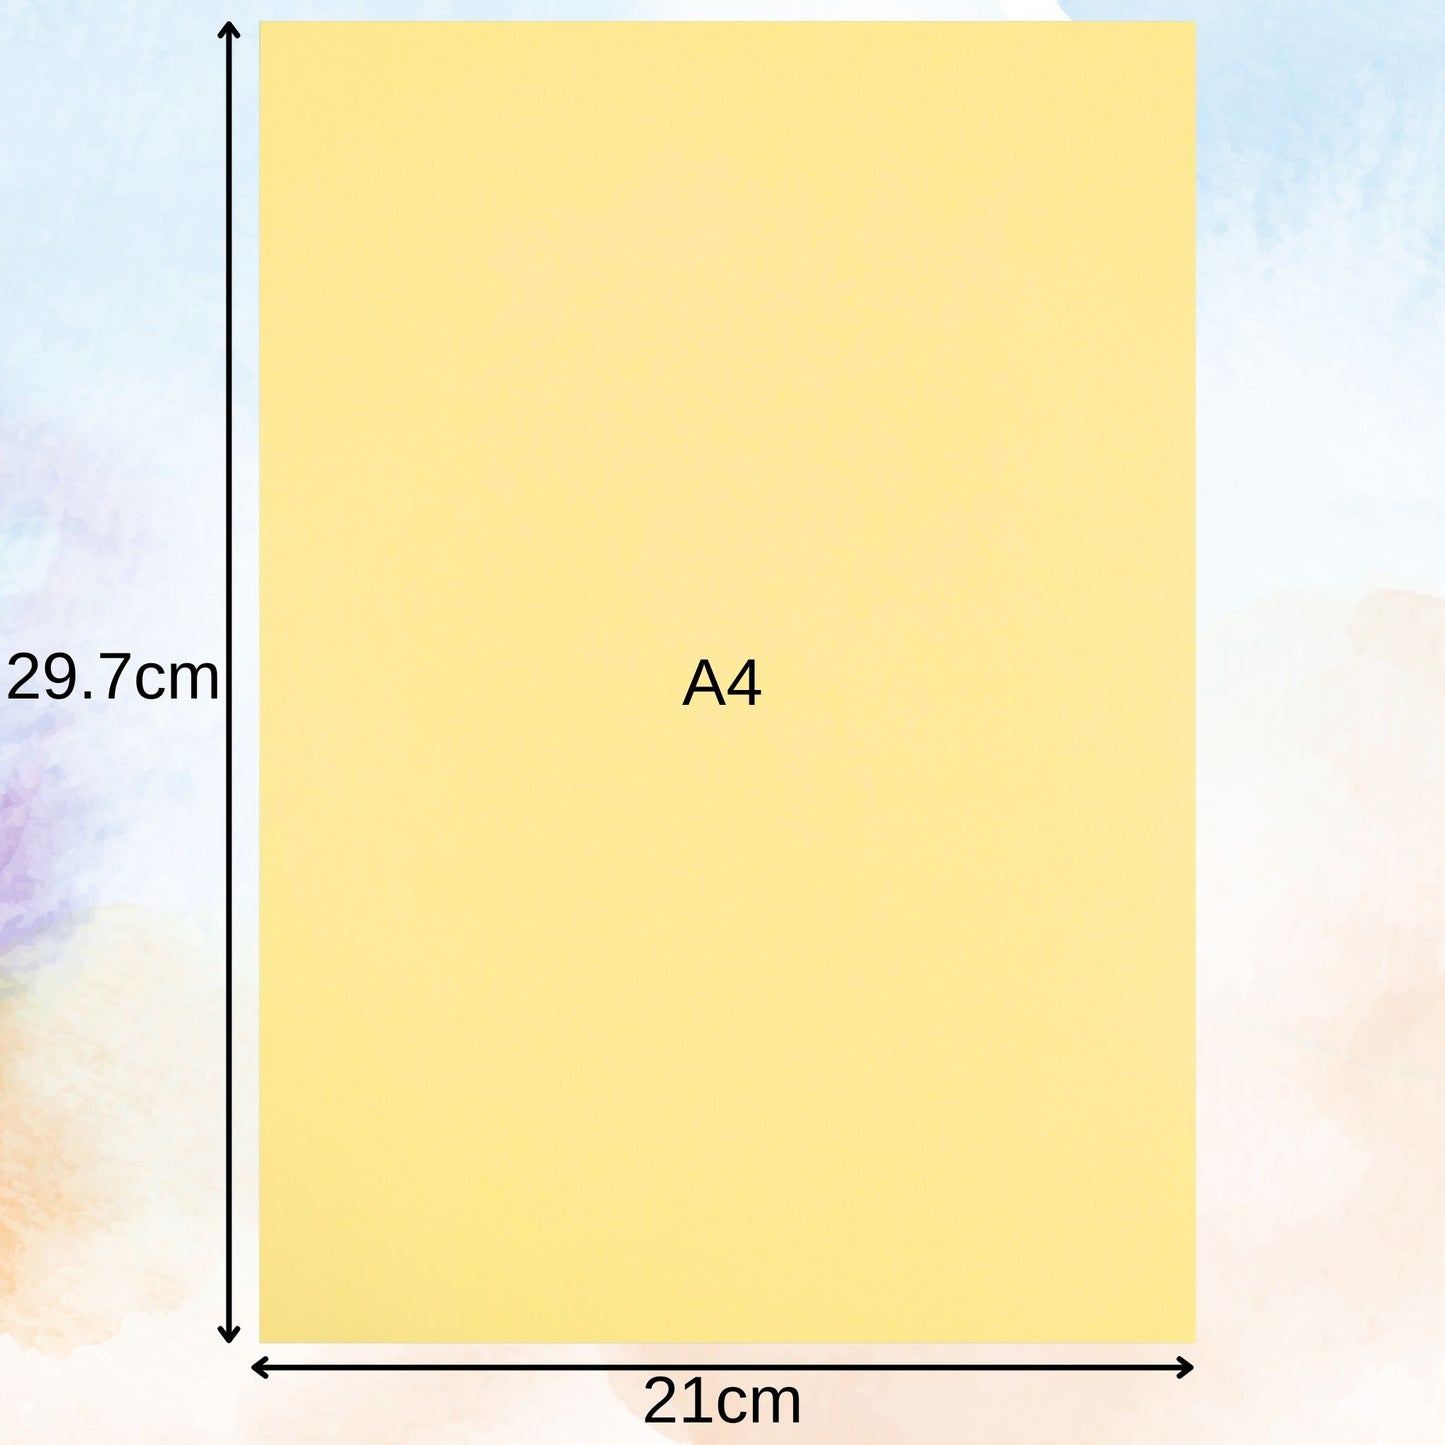 Smooth A4 Craft Card 160gsm 100 Sheets Choose Colour